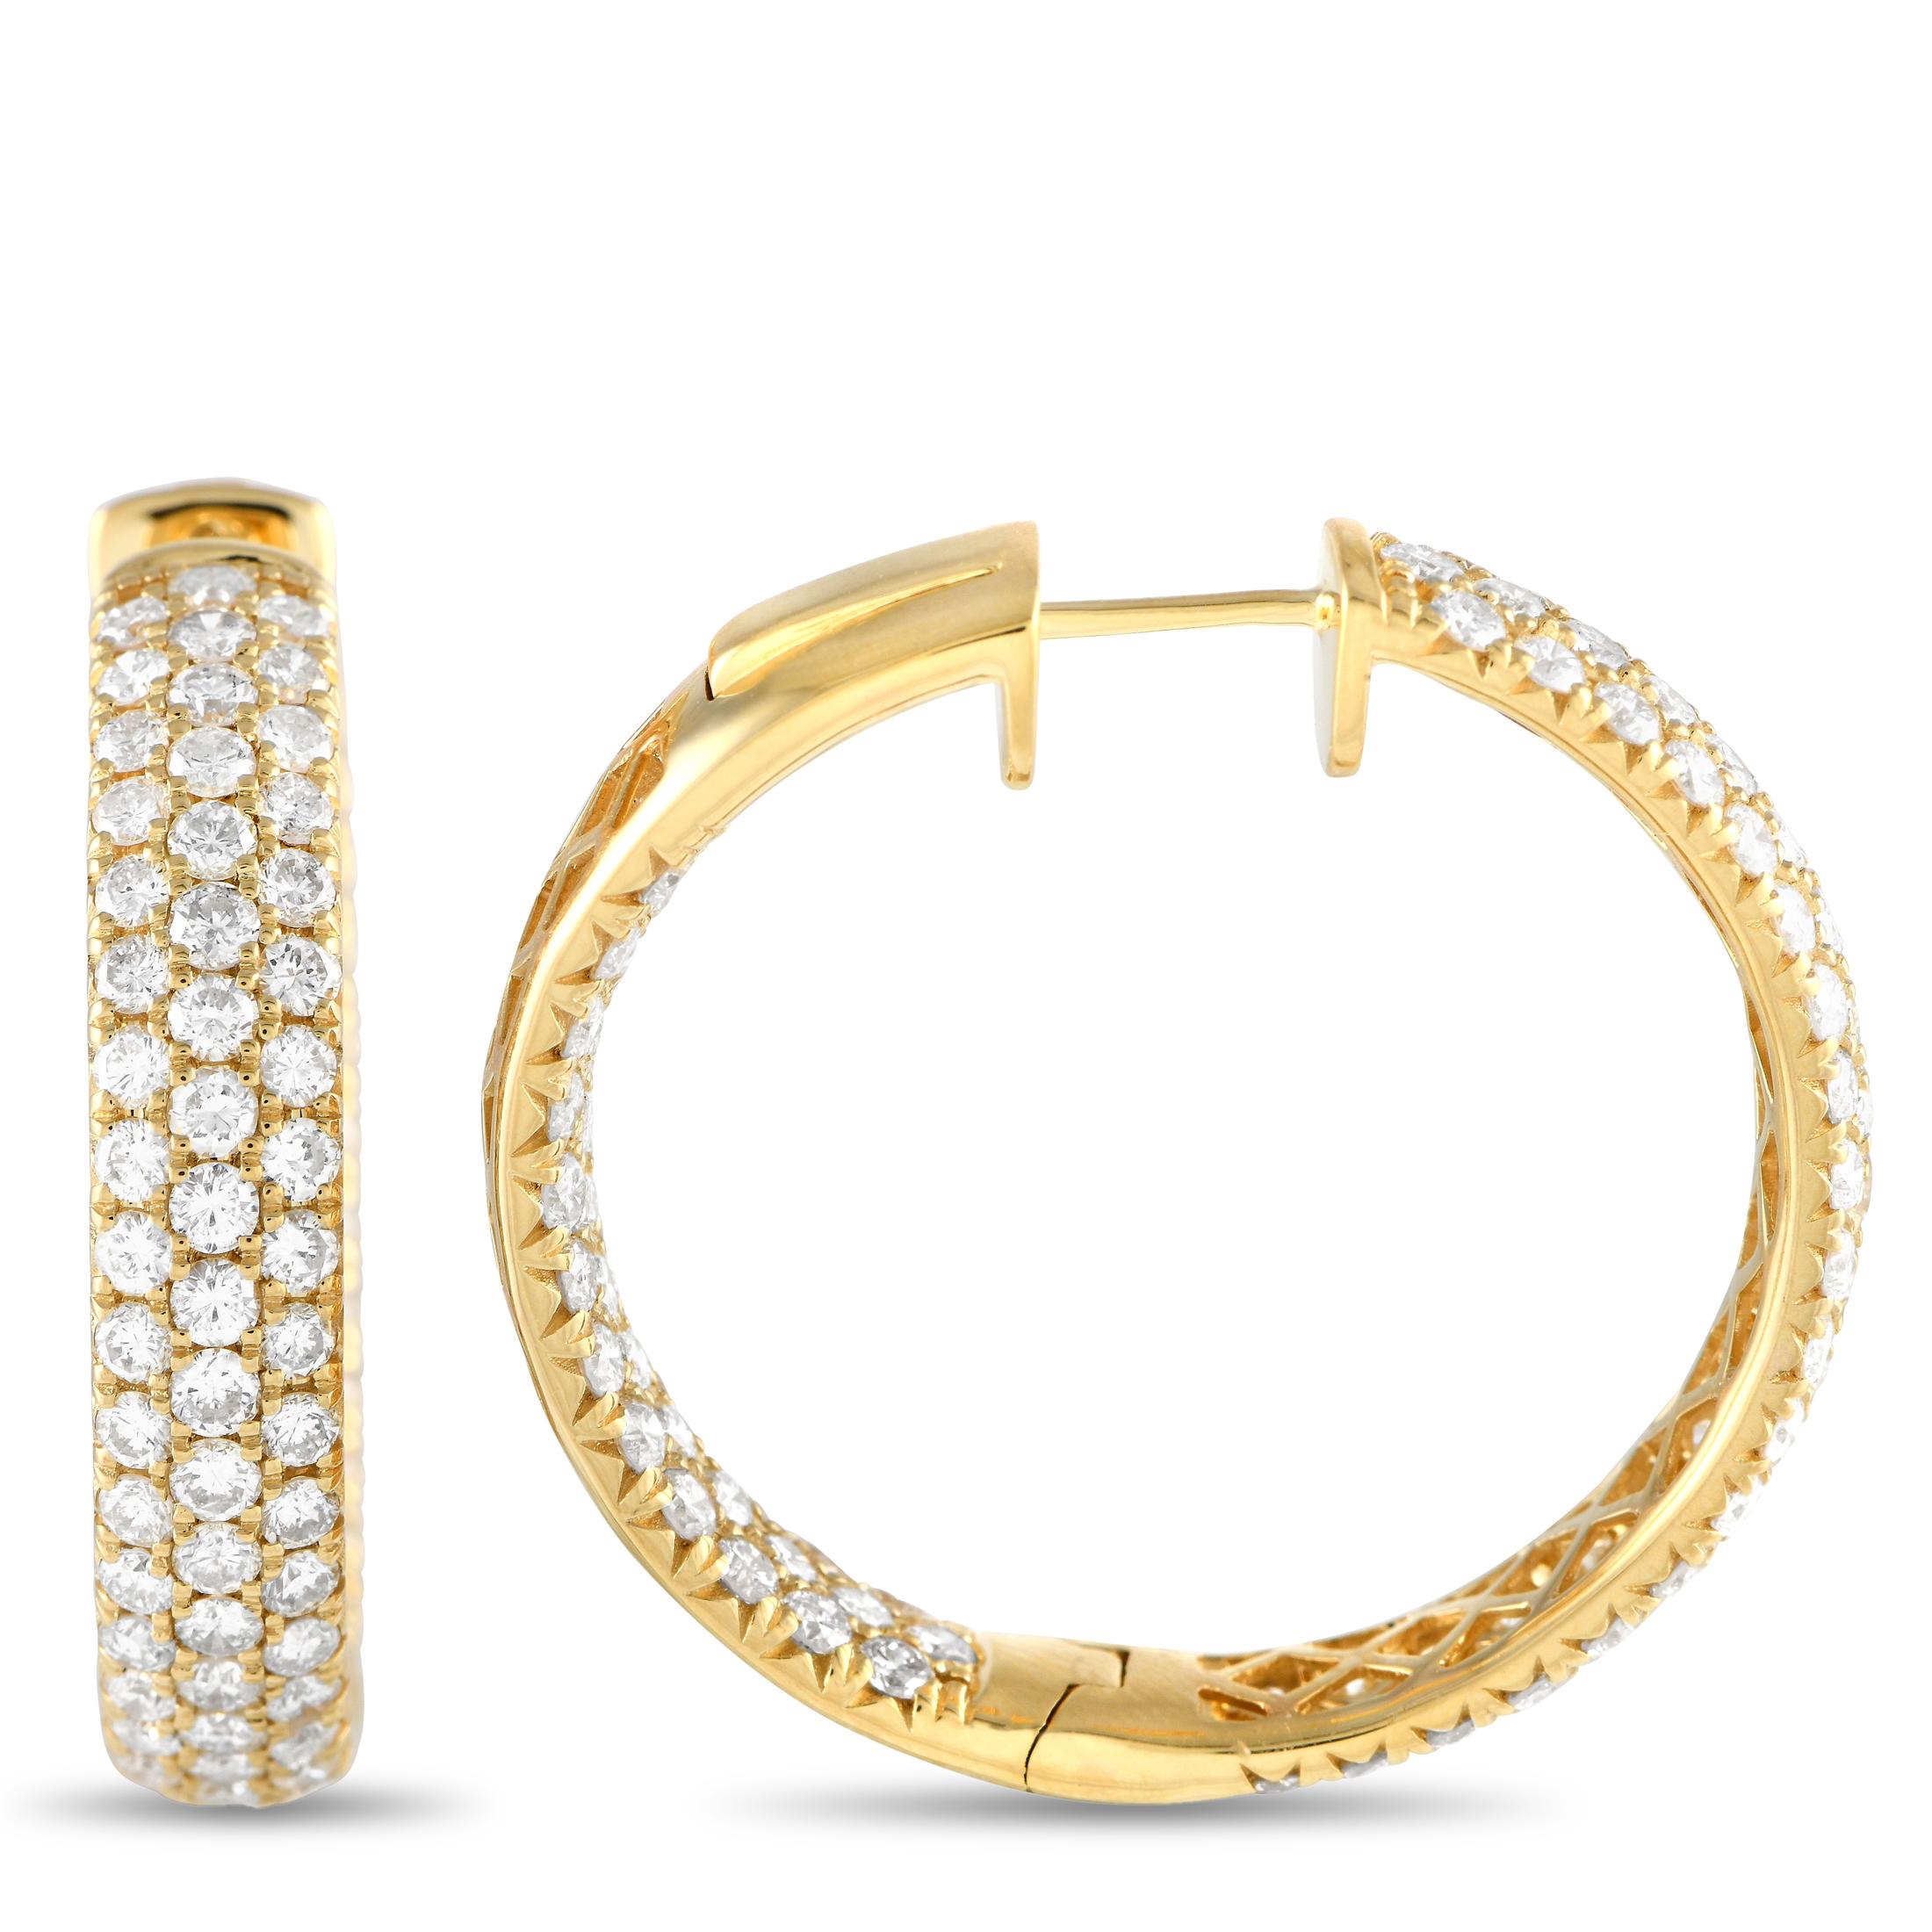 These are the elevated version of your classic plain gold hoops. Fashioned in 18K yellow gold, each 1.25